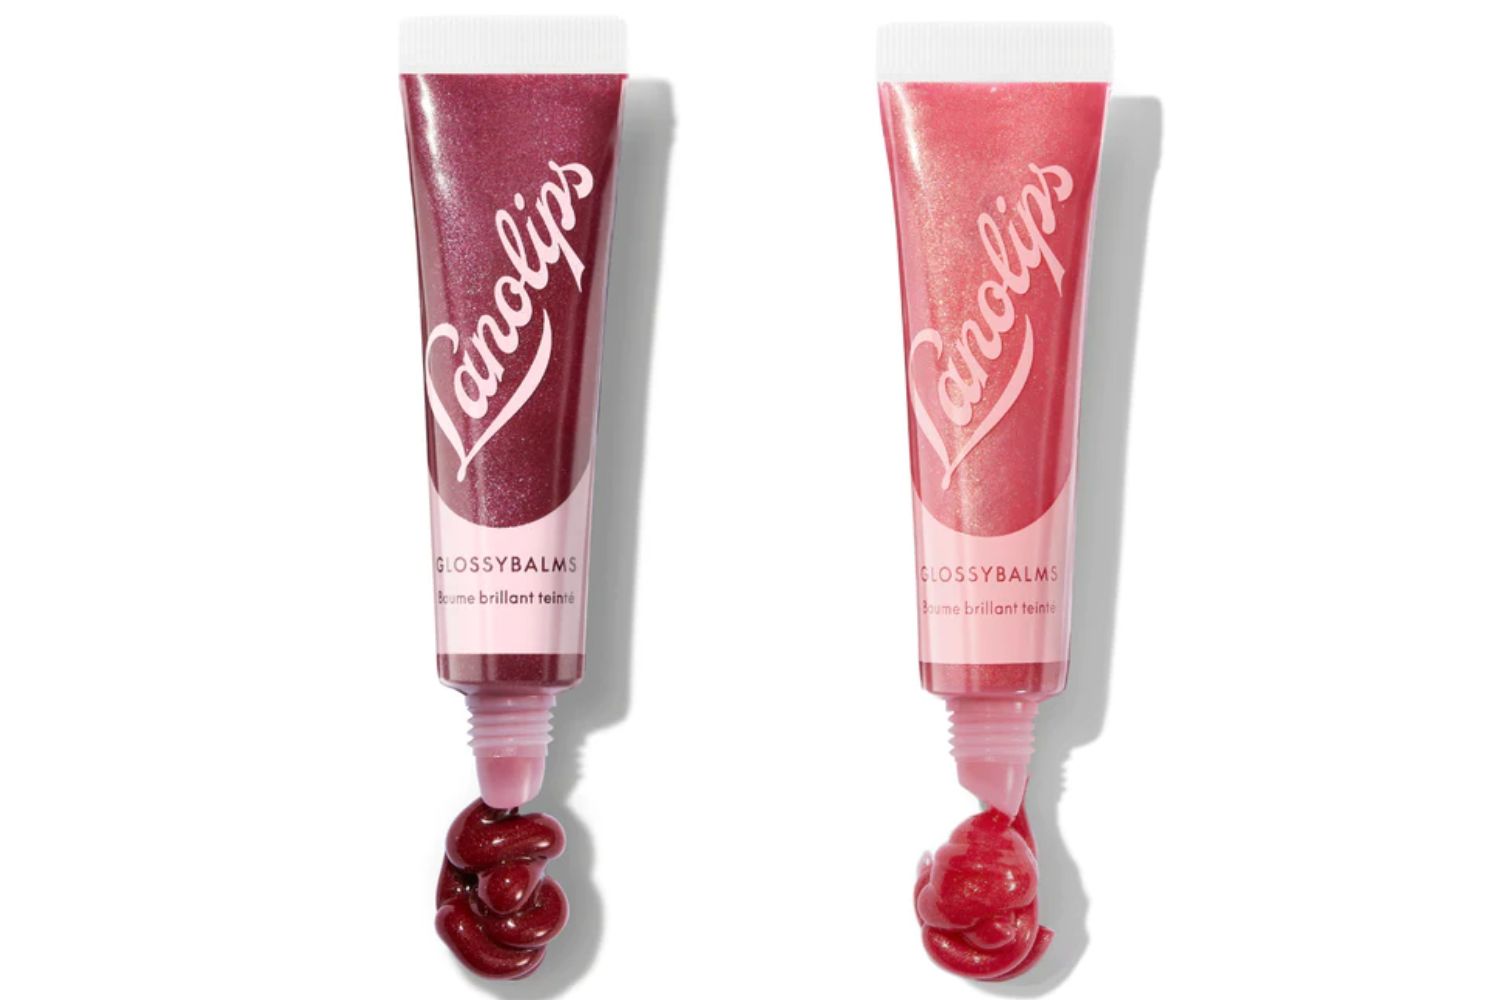 Lanolips Glossy Balm in Berry and Candy